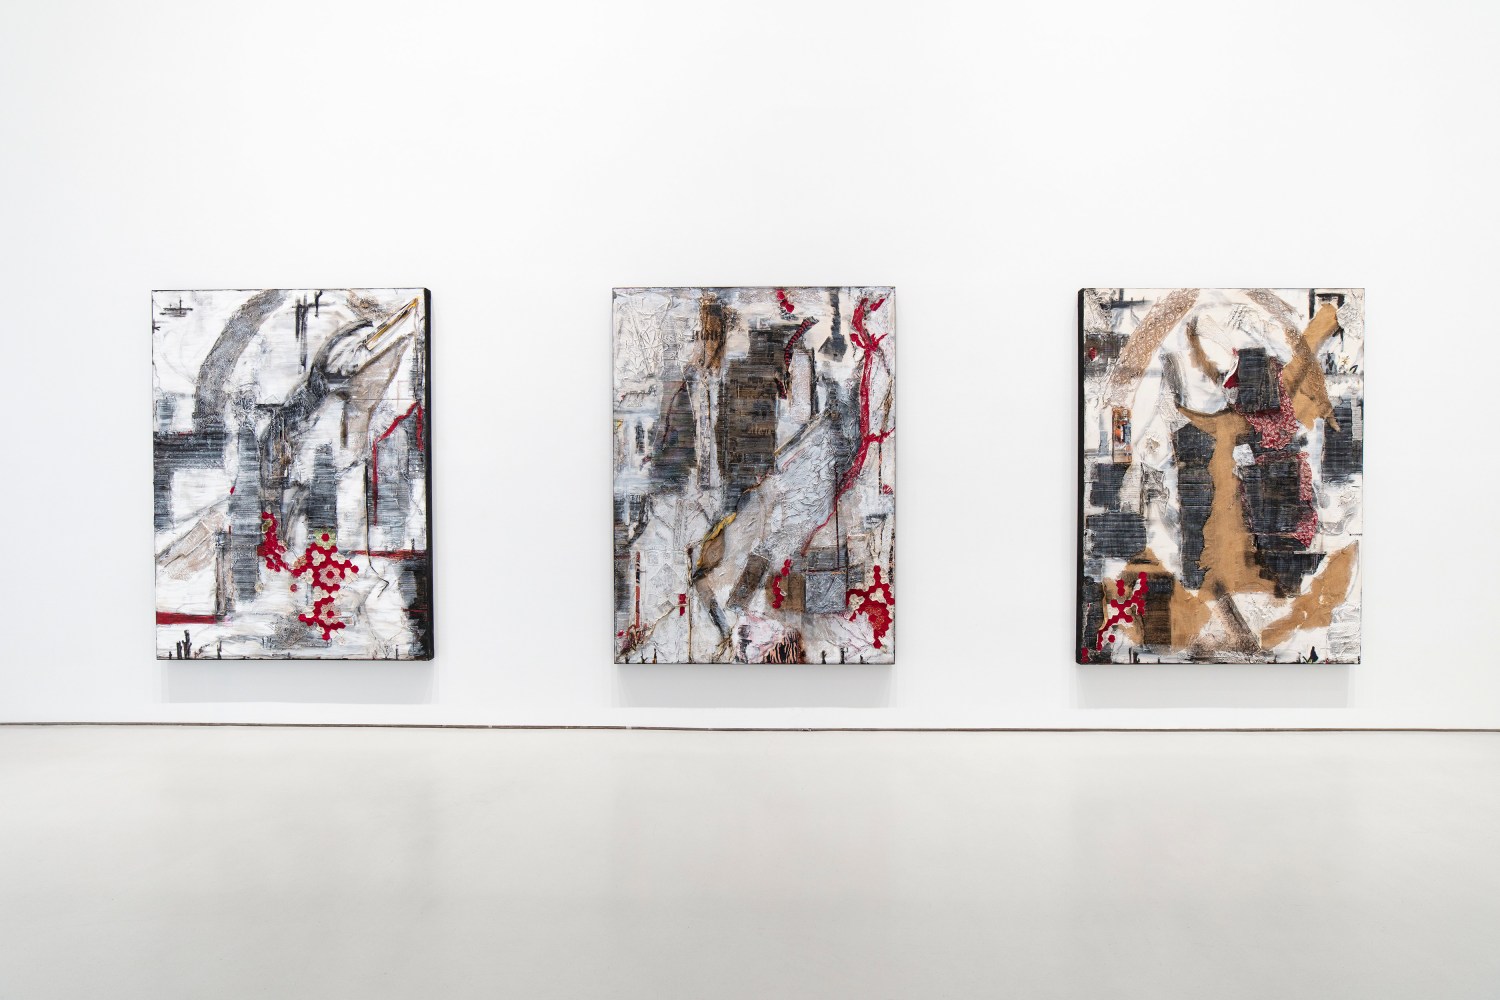 three 8 x 6 foot canvases hanging on white gallery wall. the artworks are made of white paint, red fabric, burlap, and cardboard, in abstract compositions